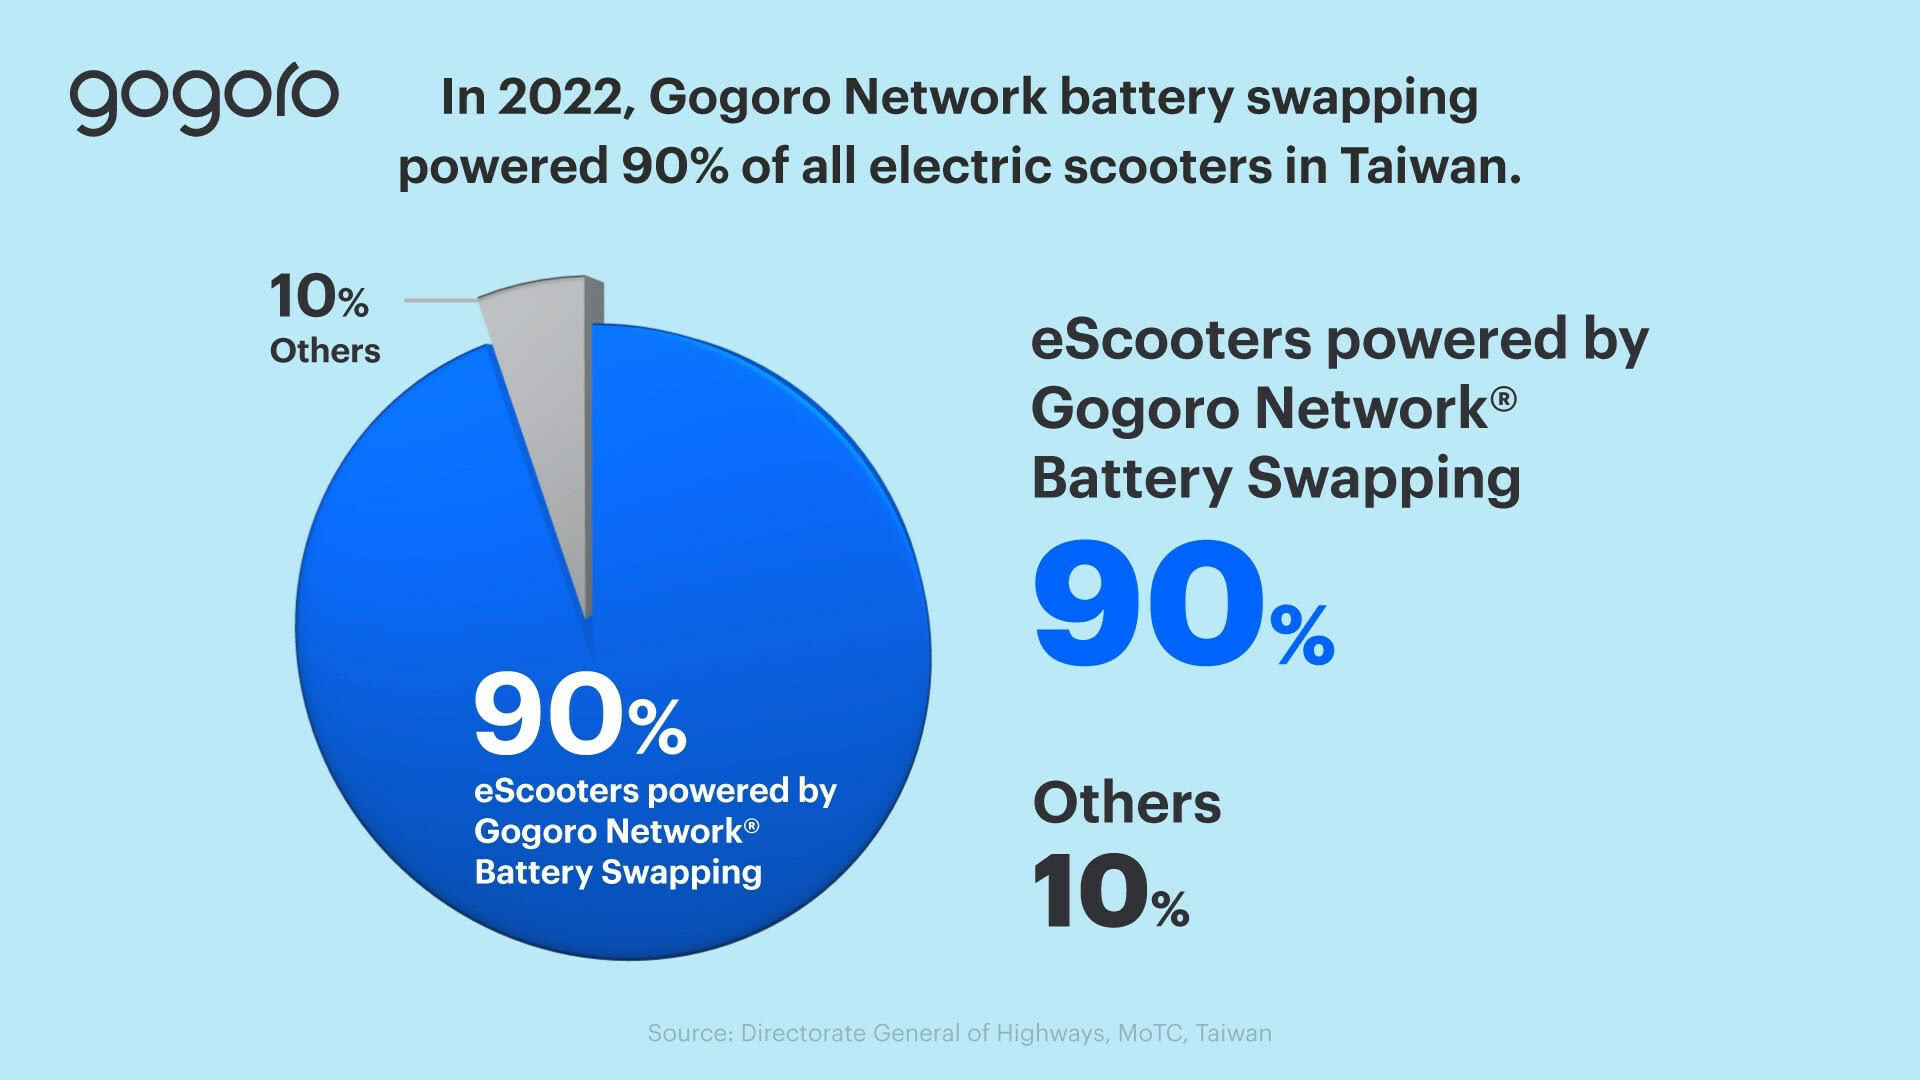 Gogoro Network battery swapping powered 90-percent of all electric scooters in Taiwan including five out of the top six electric vehicle makers. (PRNewsfoto/Gogoro)